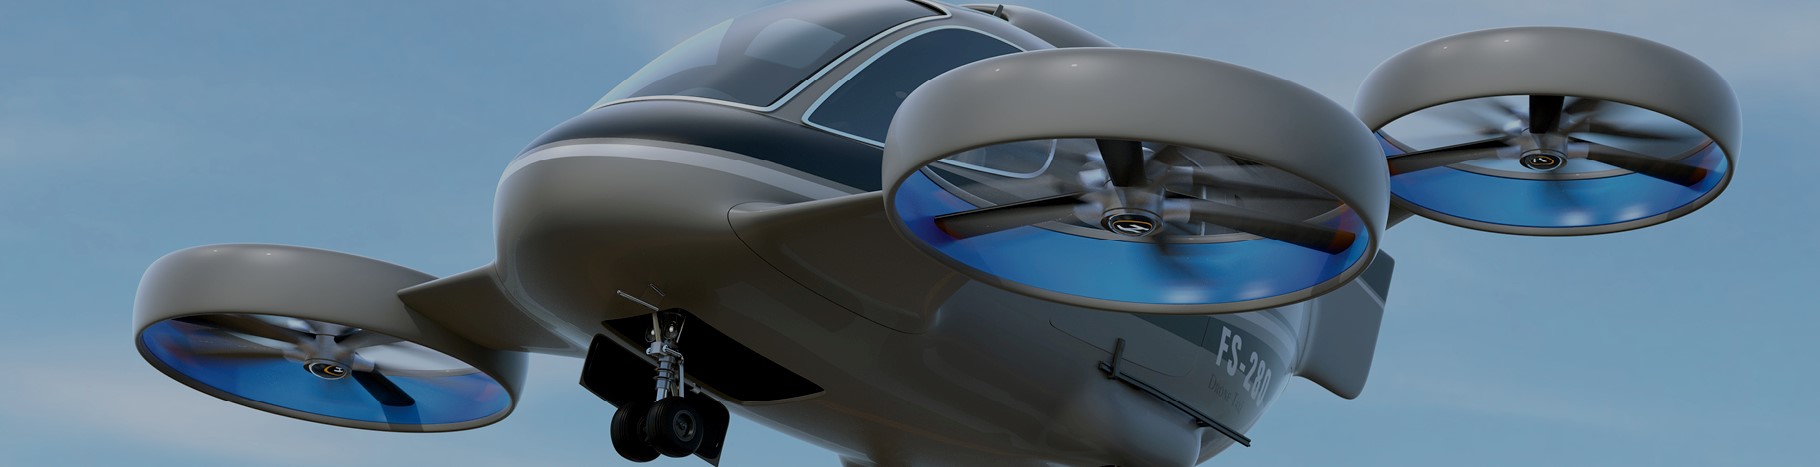 Advanced Air Mobility: Future of Advanced Air Mobility with Lilium | Podcasts | Viewpoints